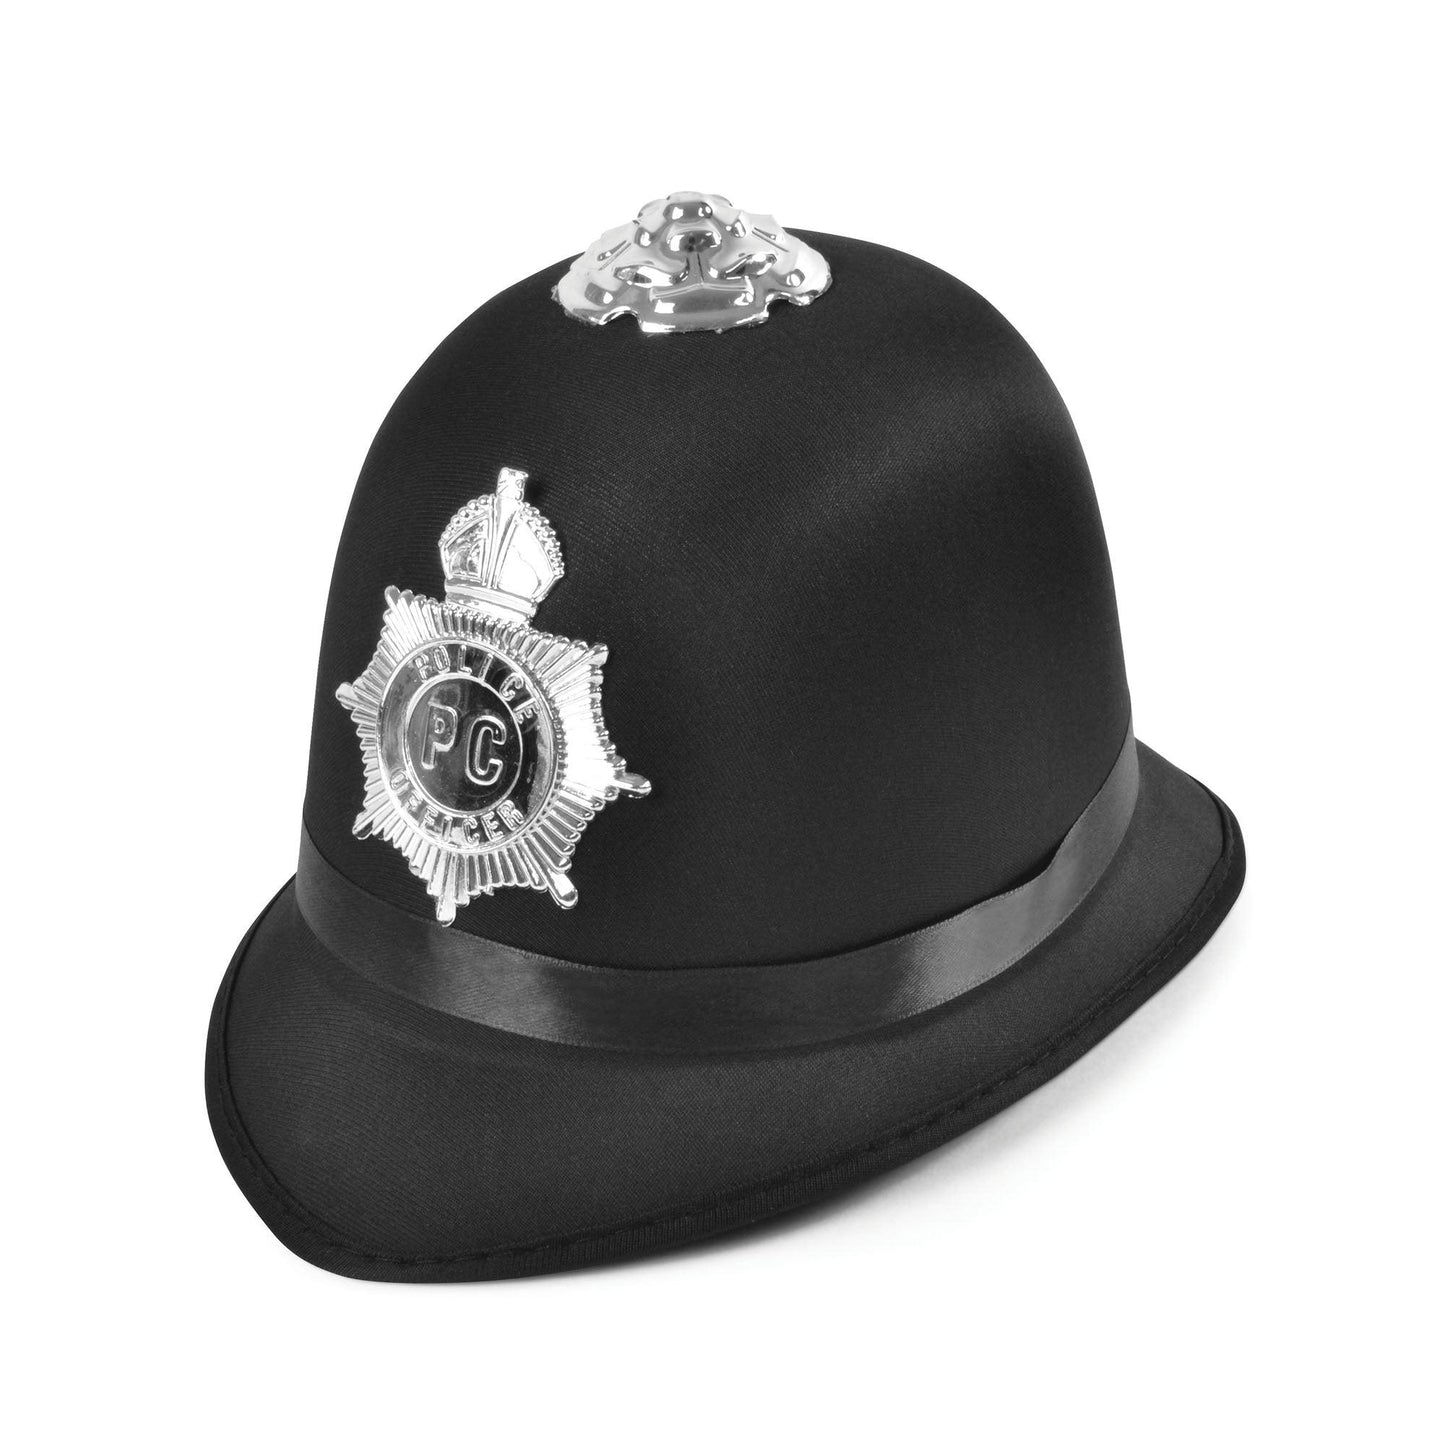 Police Bobby Hat (Satin Fabric) - Labreeze